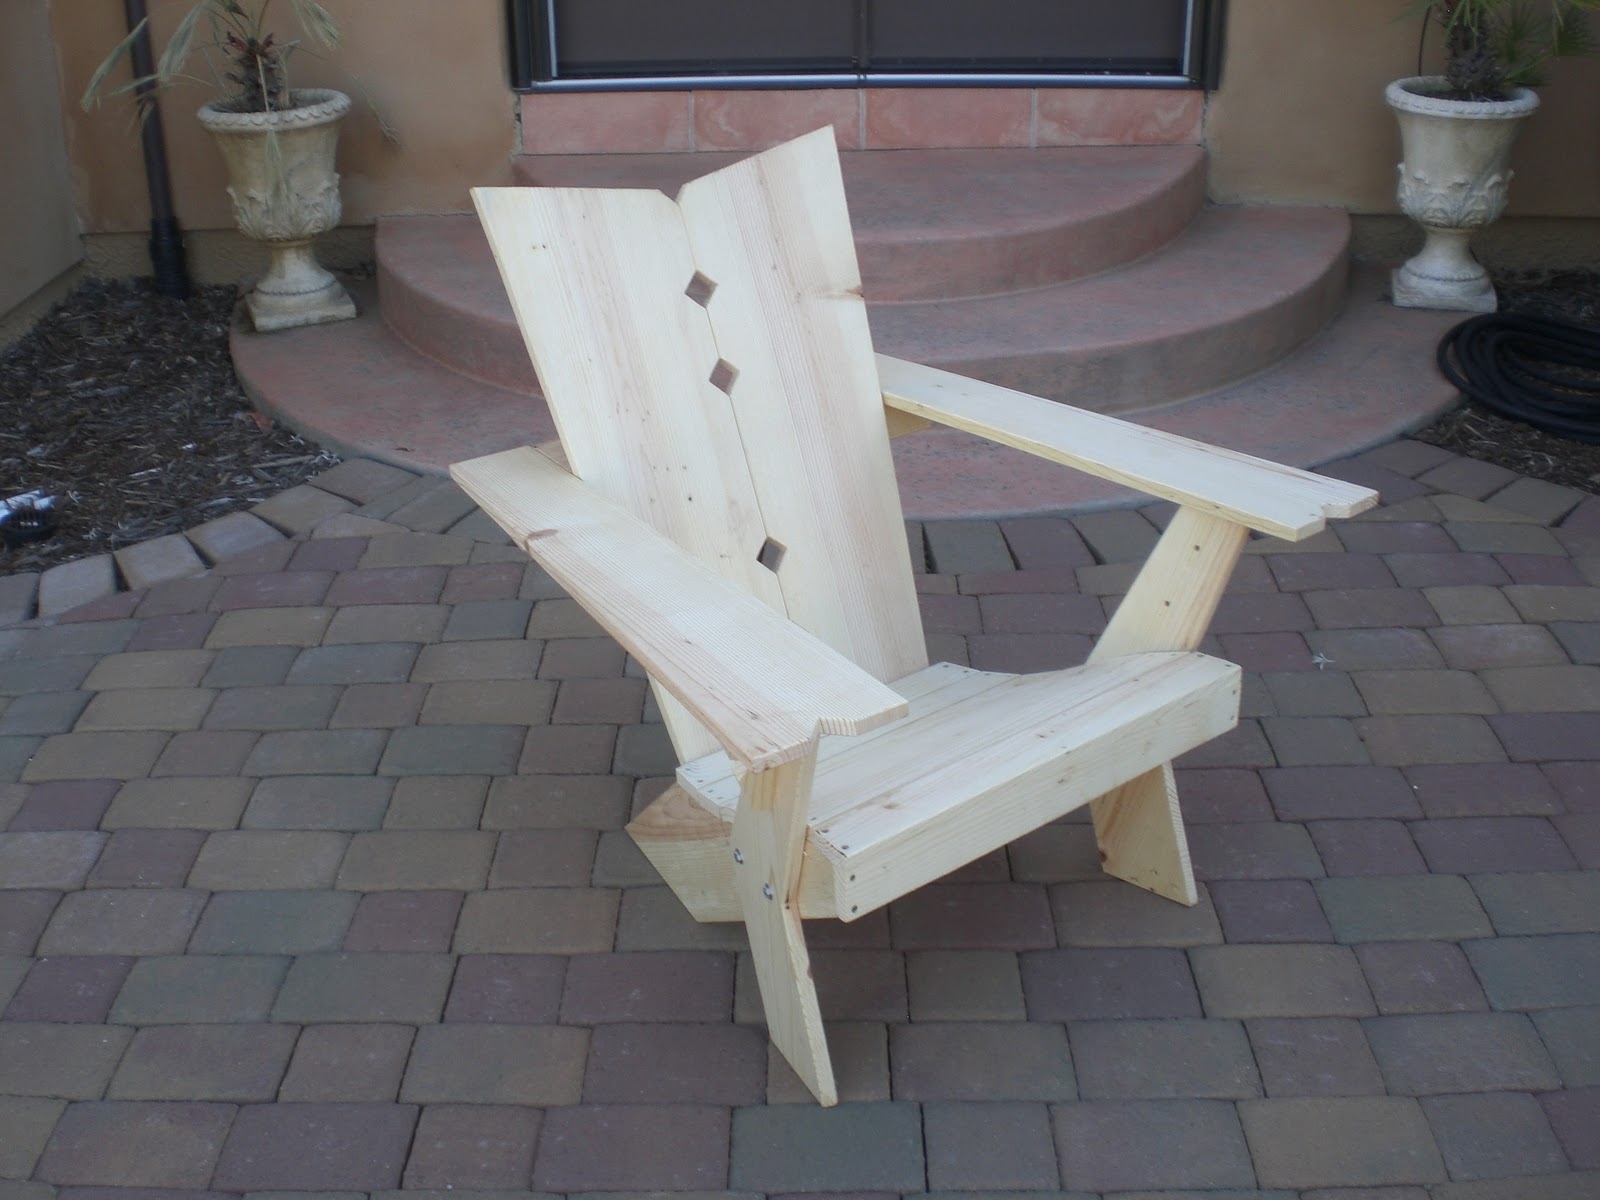 high chair woodworking plans